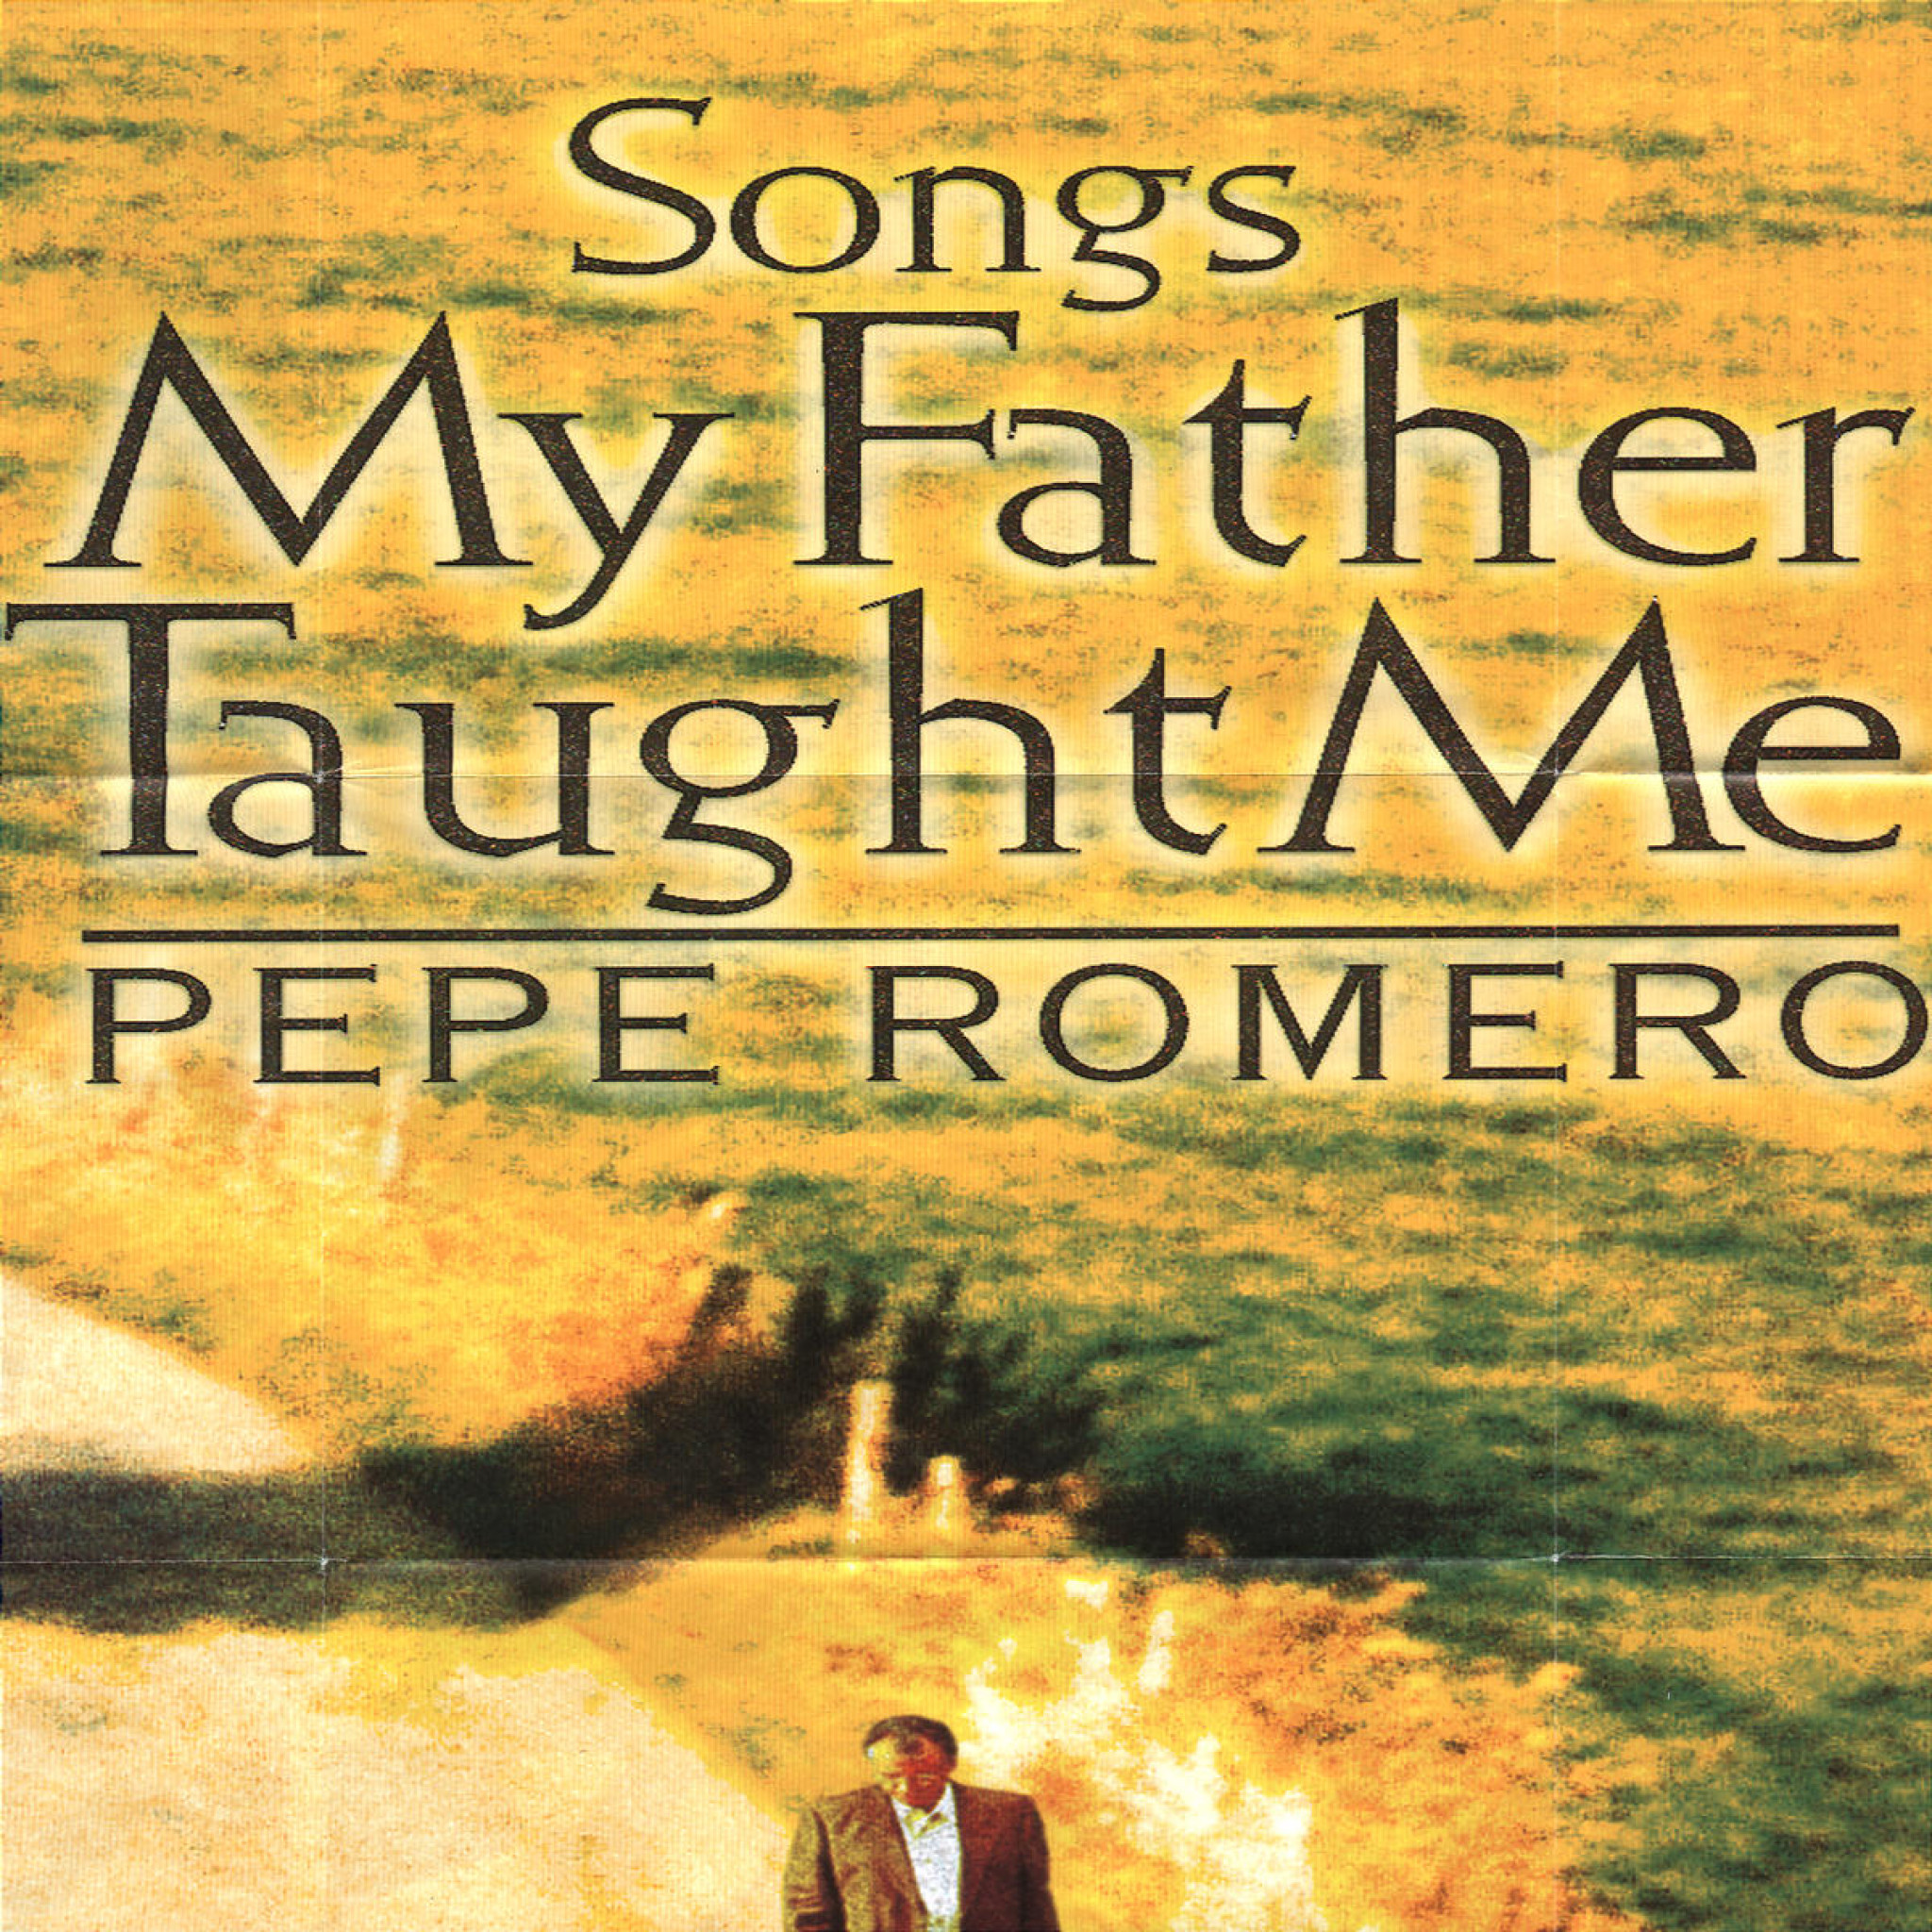 SONGS MY FATHER TAUGHT ME PEPE ROMERO